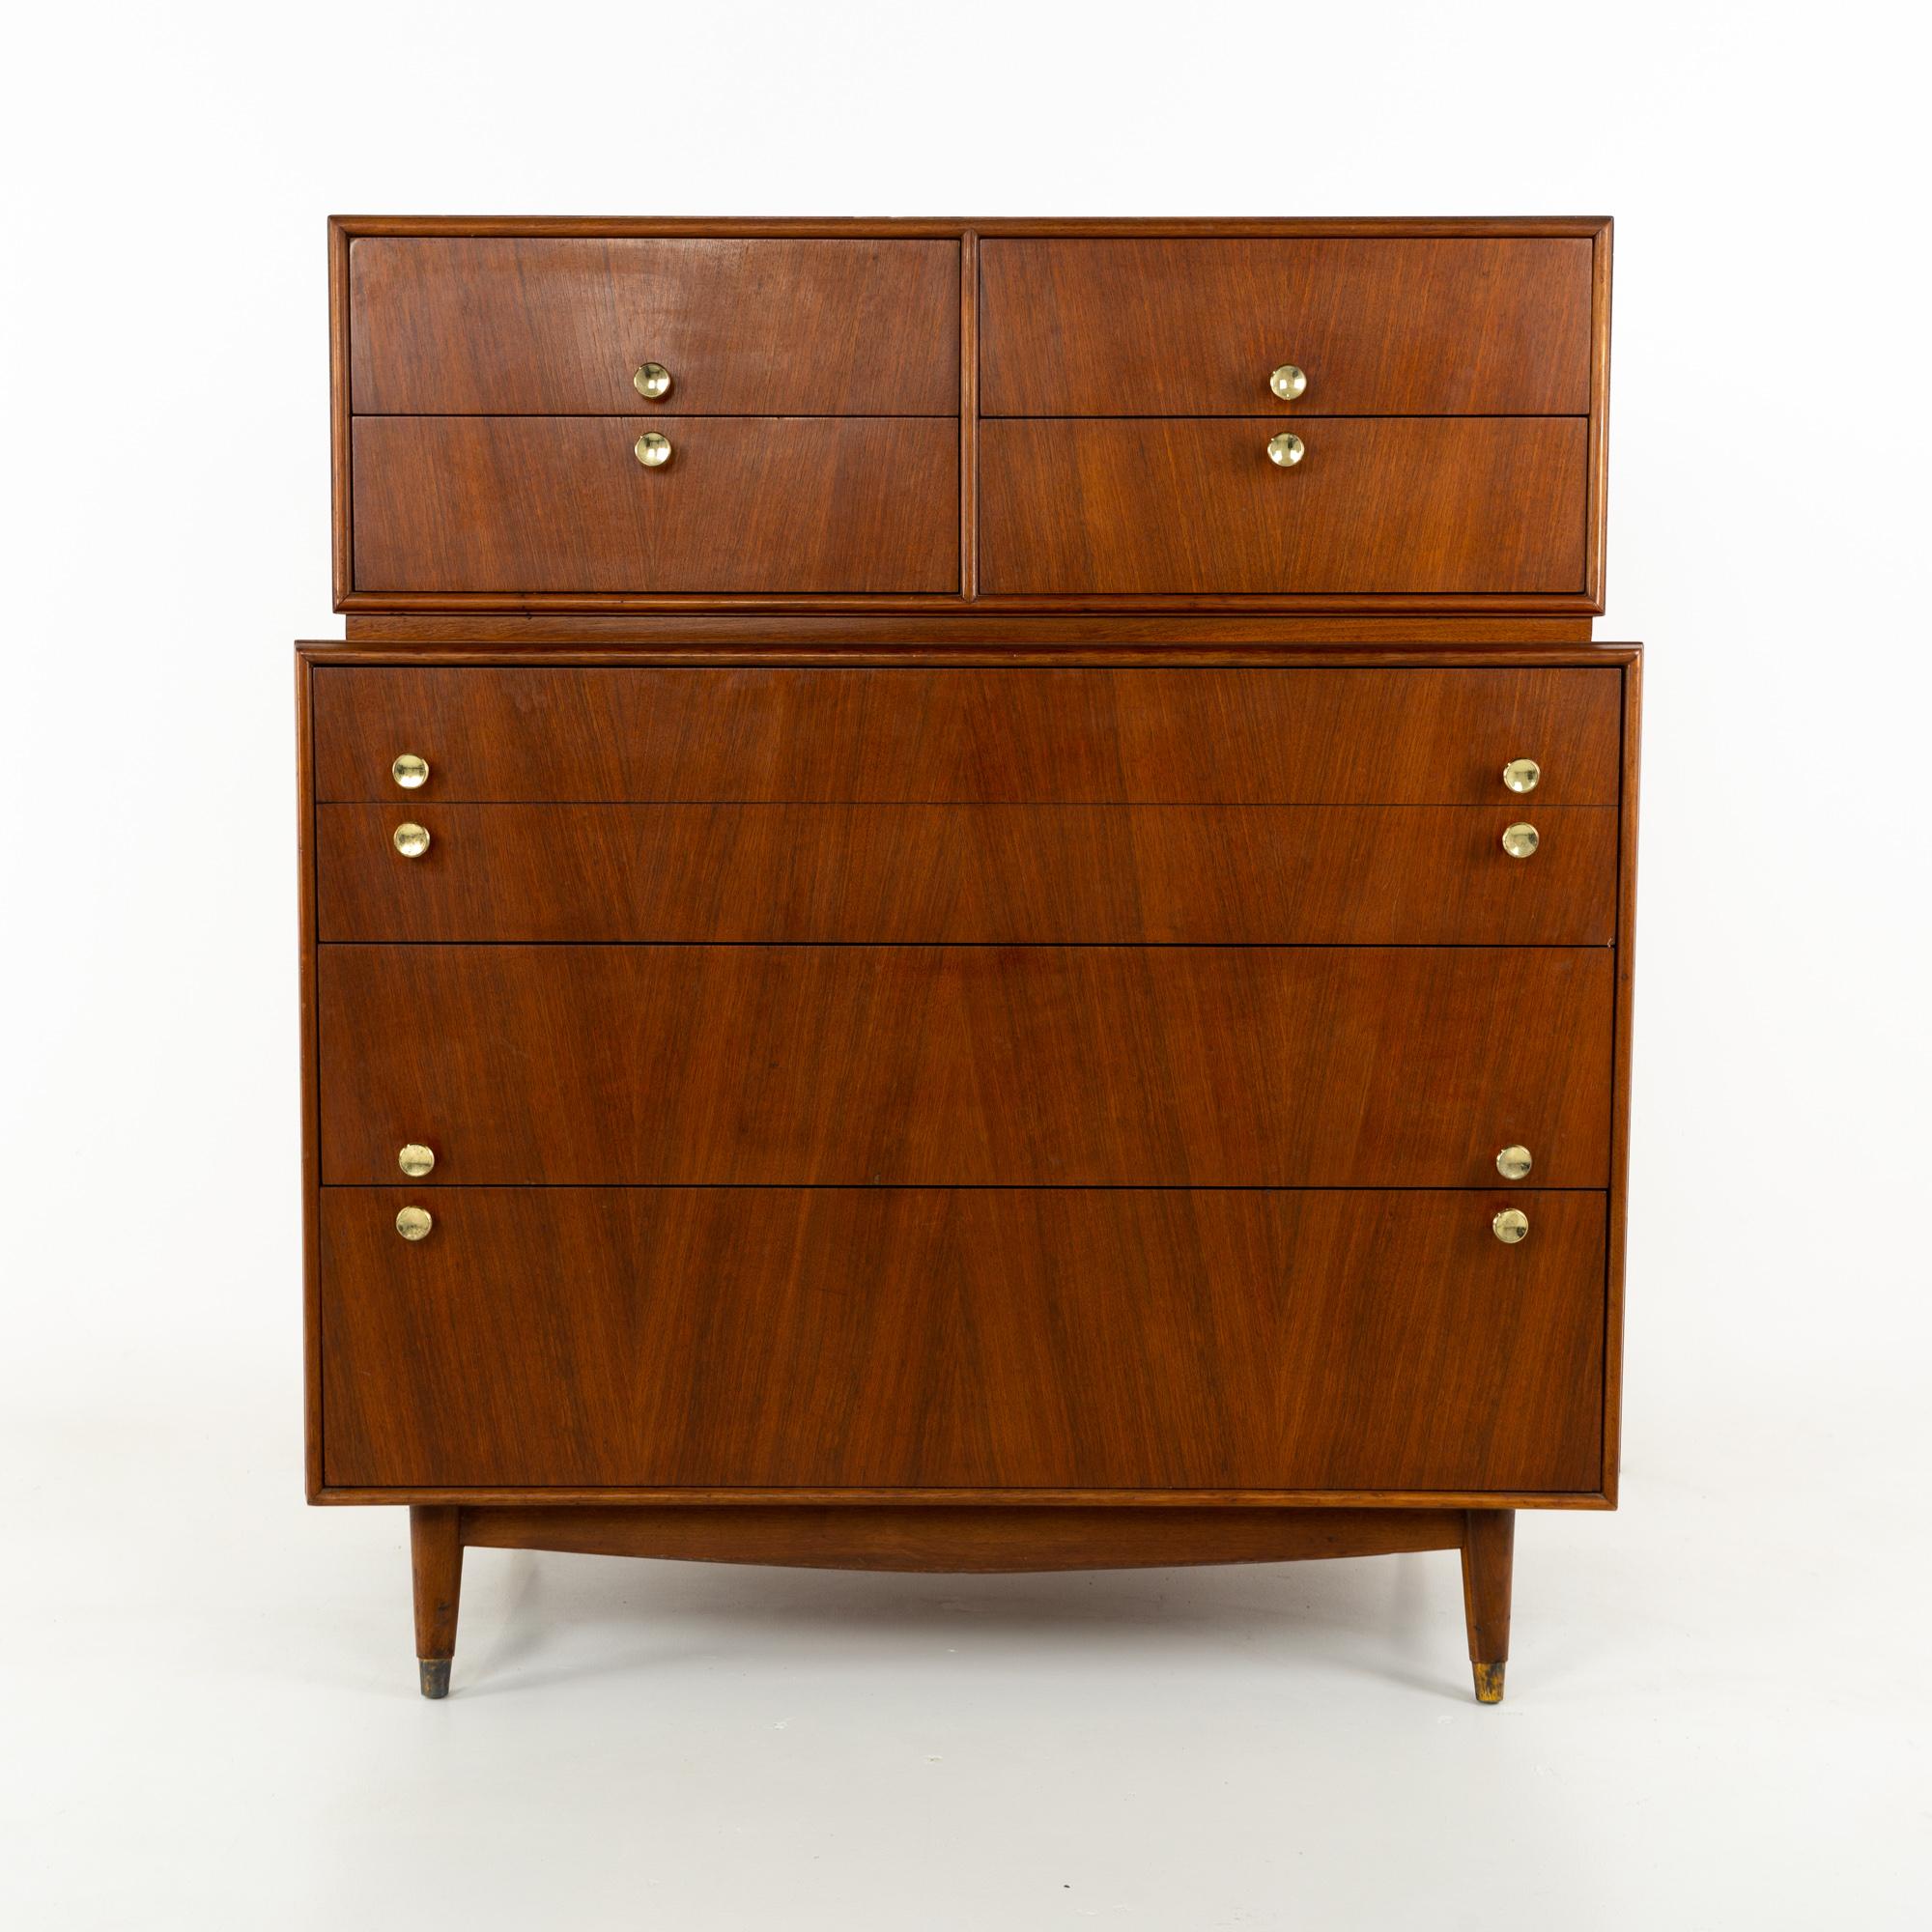 Kroehler Signature Series style Mid Century walnut and brass highboy dresser
This dresser is 40.125 wide x 20.125 deep x 45.25 inches high

This price includes getting this piece in what we call restored vintage condition. That means the piece is